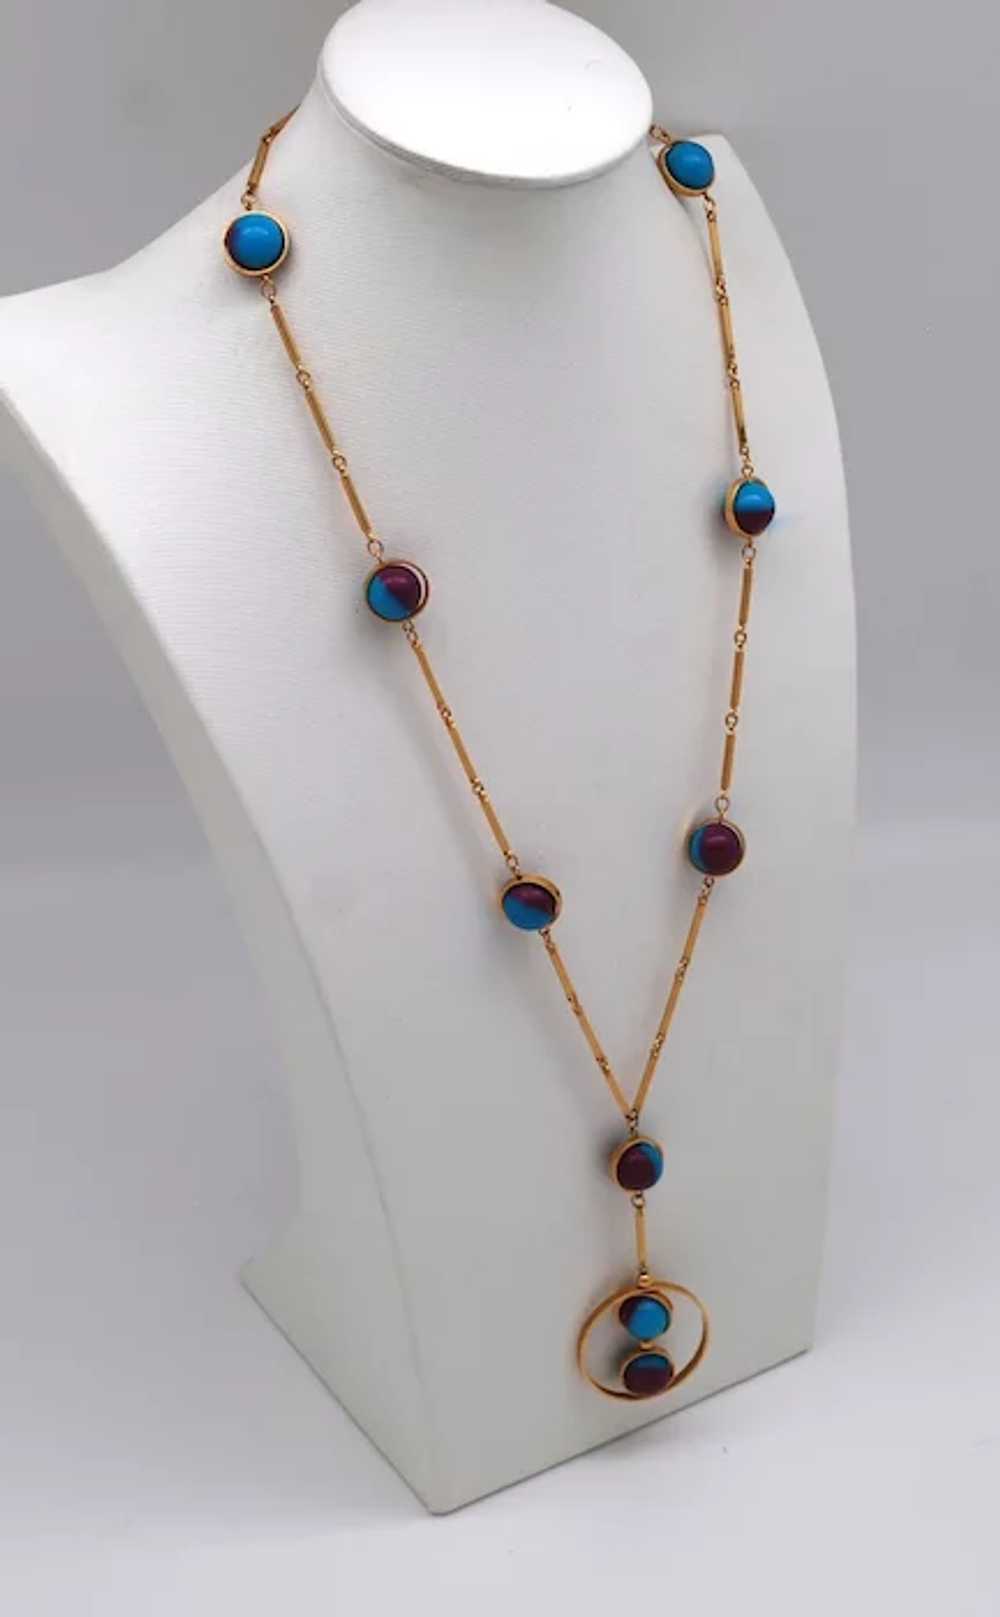 Mod Two Tone Bead and Metal Necklace With Pendant - image 4